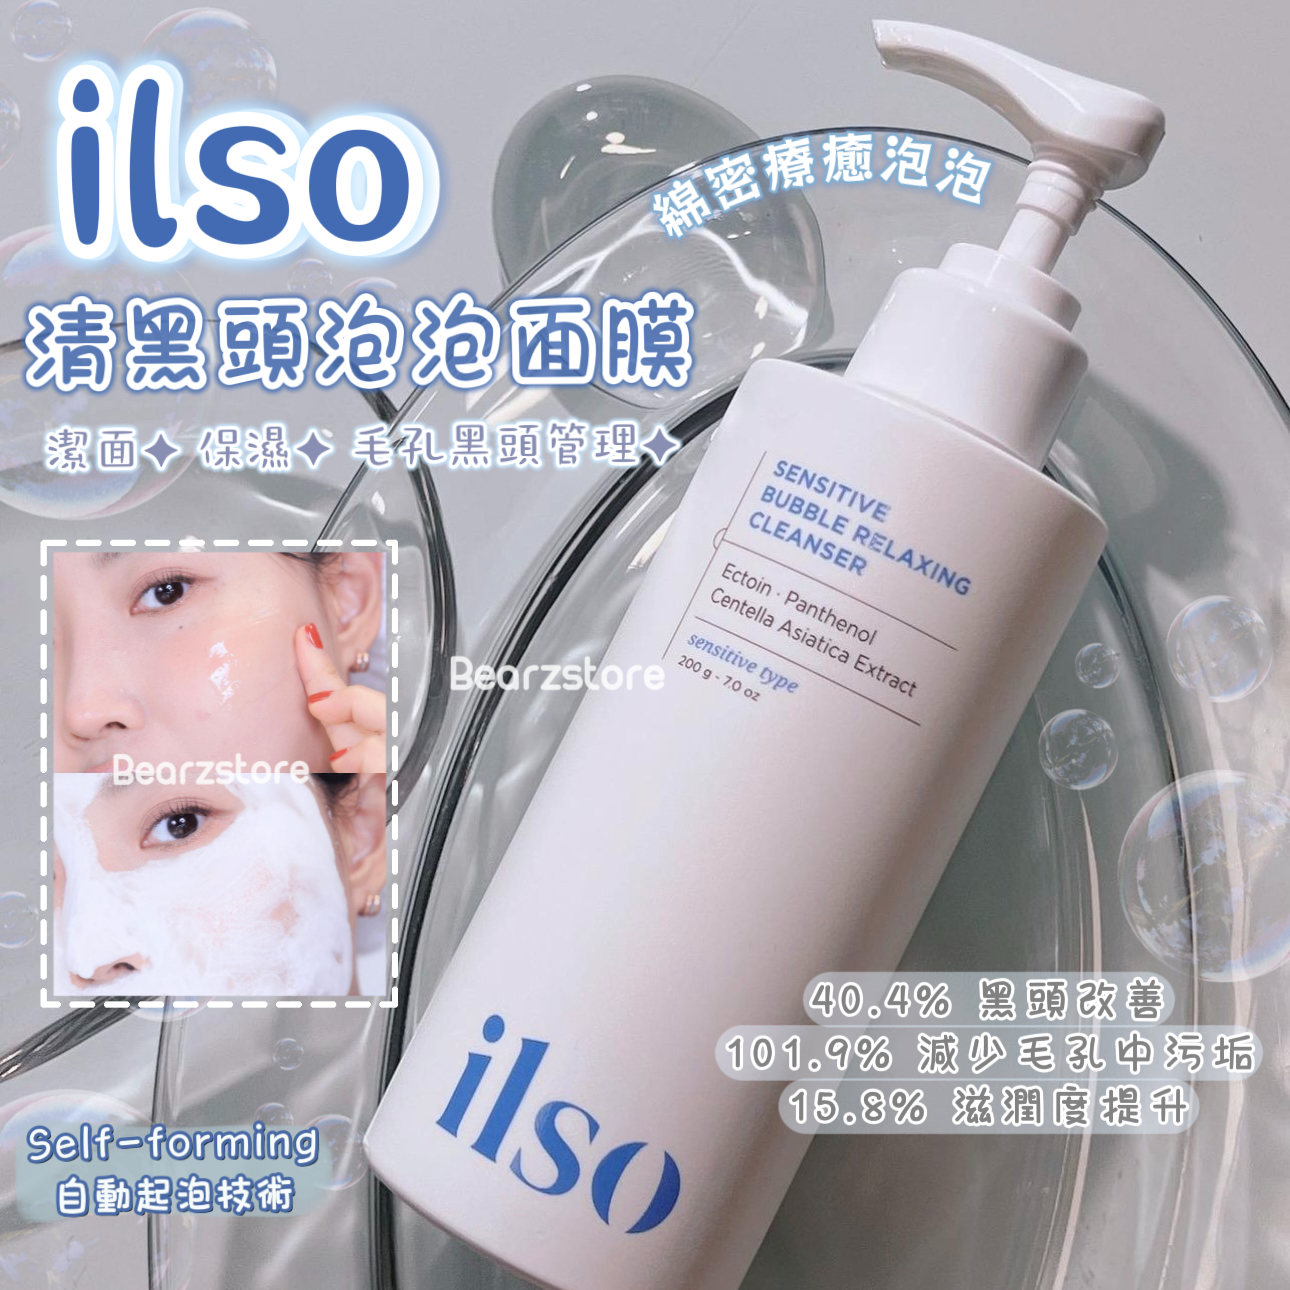 ilso熱賣產品🔥| ilso 積雪草抗敏清黑頭泡泡潔面面膜ilso Sensitive Bubble Relaxing Cleanser🩵